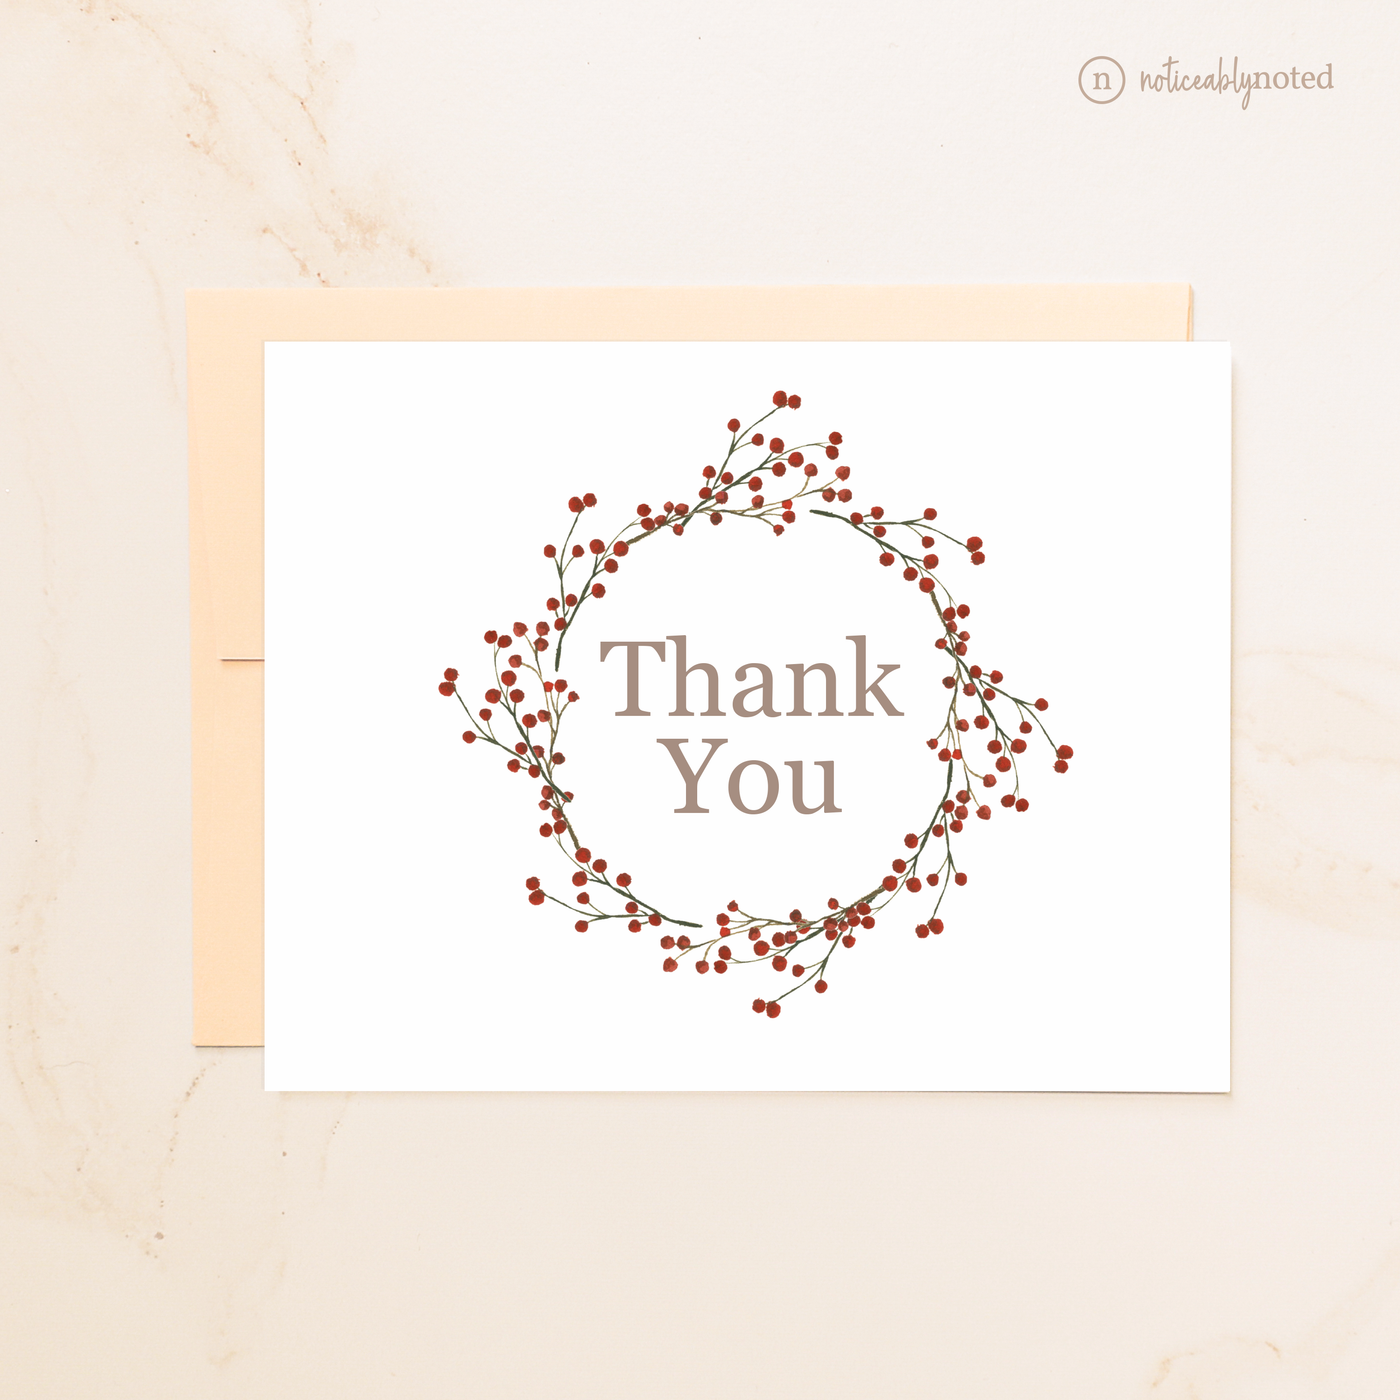 Christmas Thank You Cards | Noticeably Noted